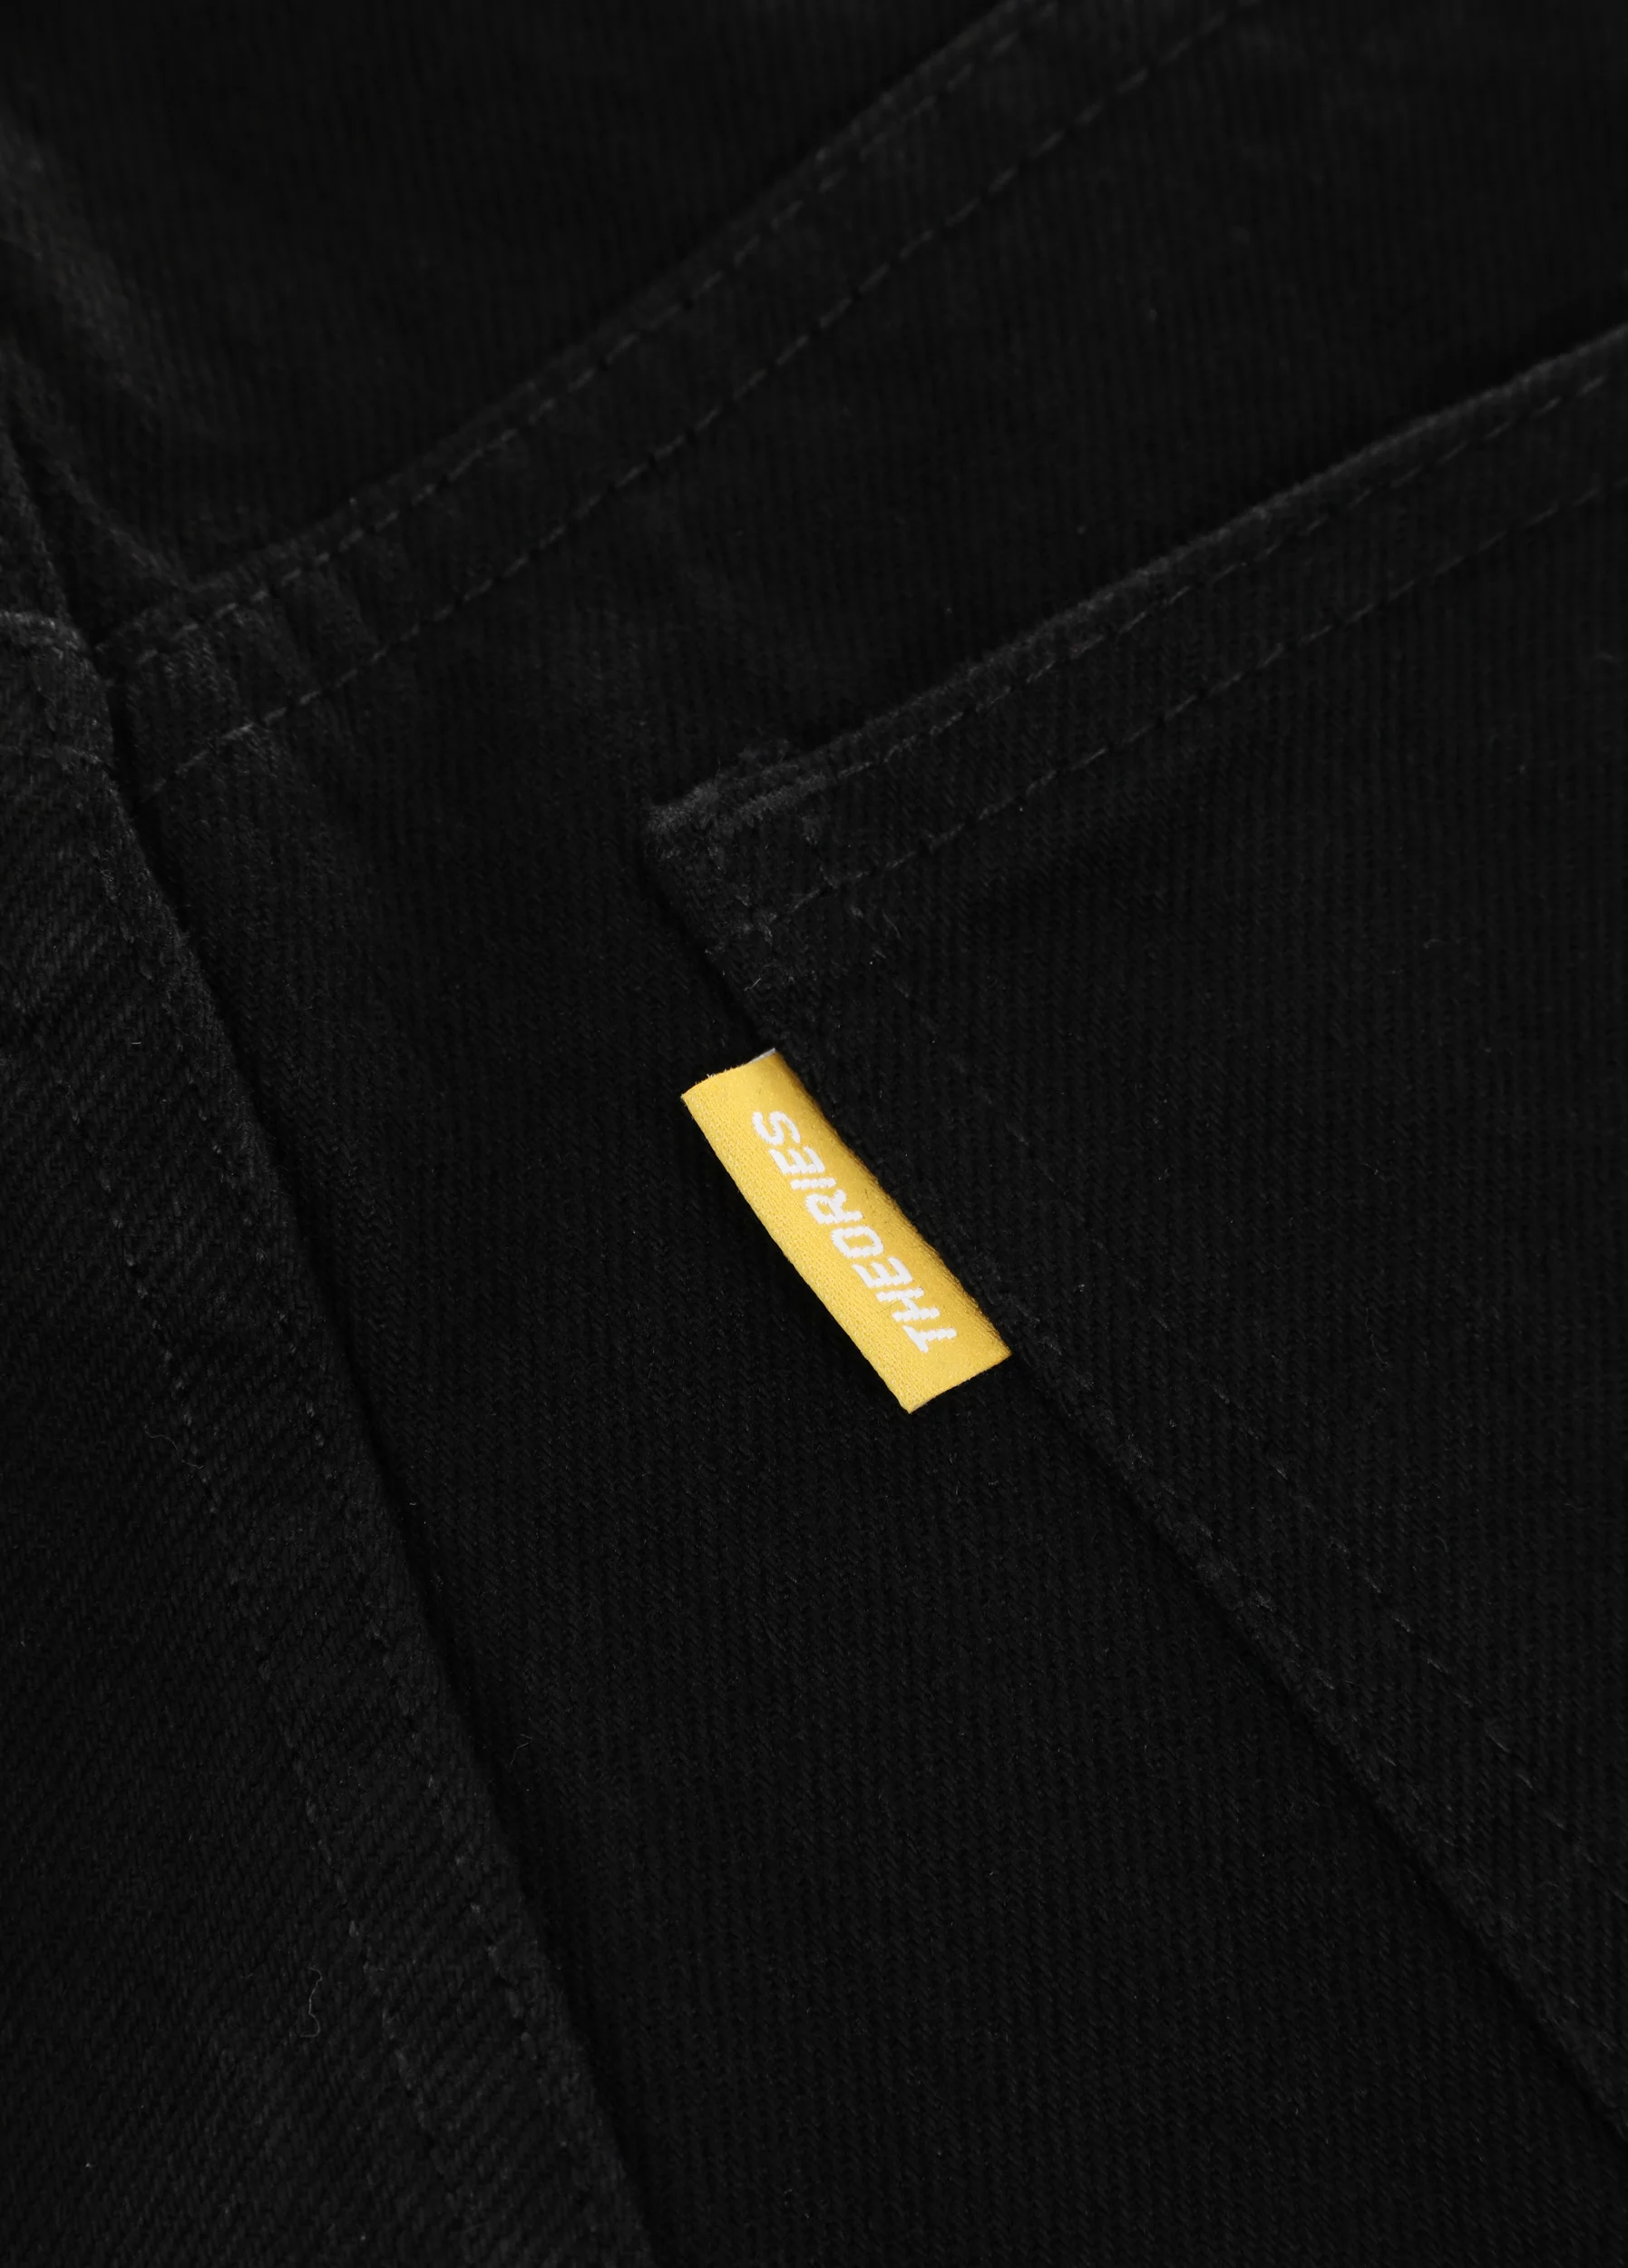 Theories Plaza Jeans - black - Free Shipping | Tactics